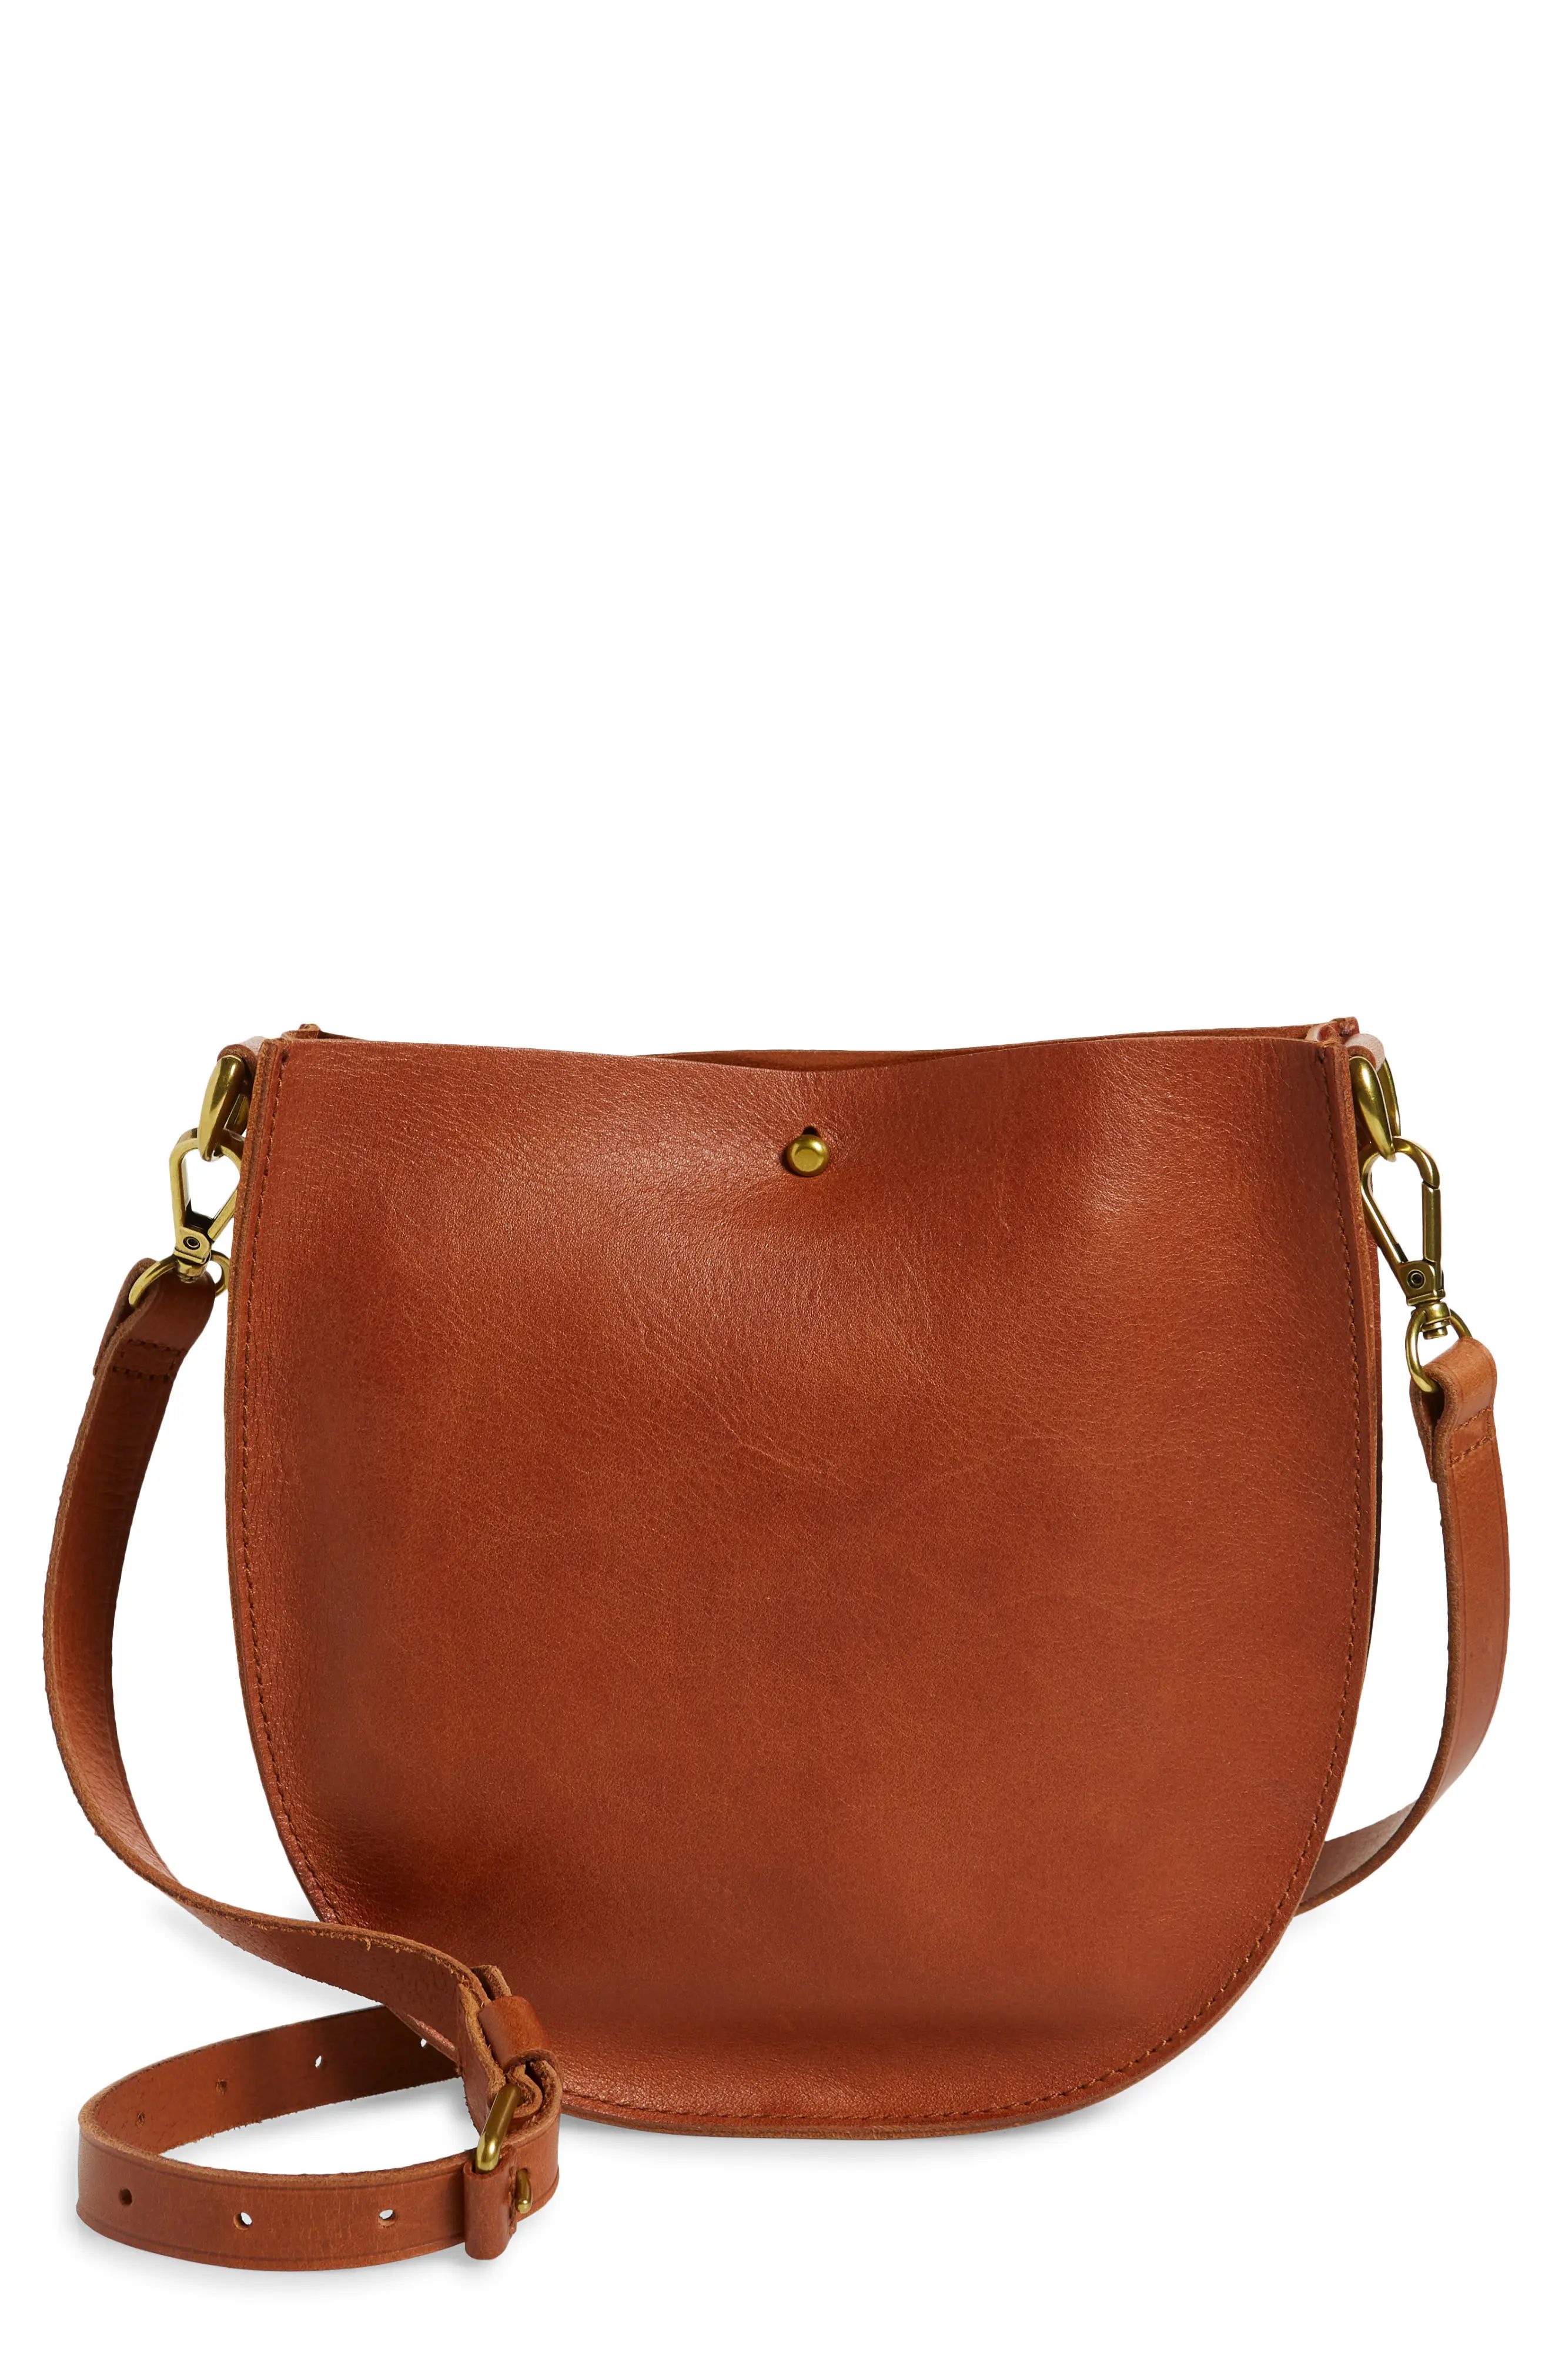 Madewell The Small Transport Leather Saddle Bag - Brown | Nordstrom